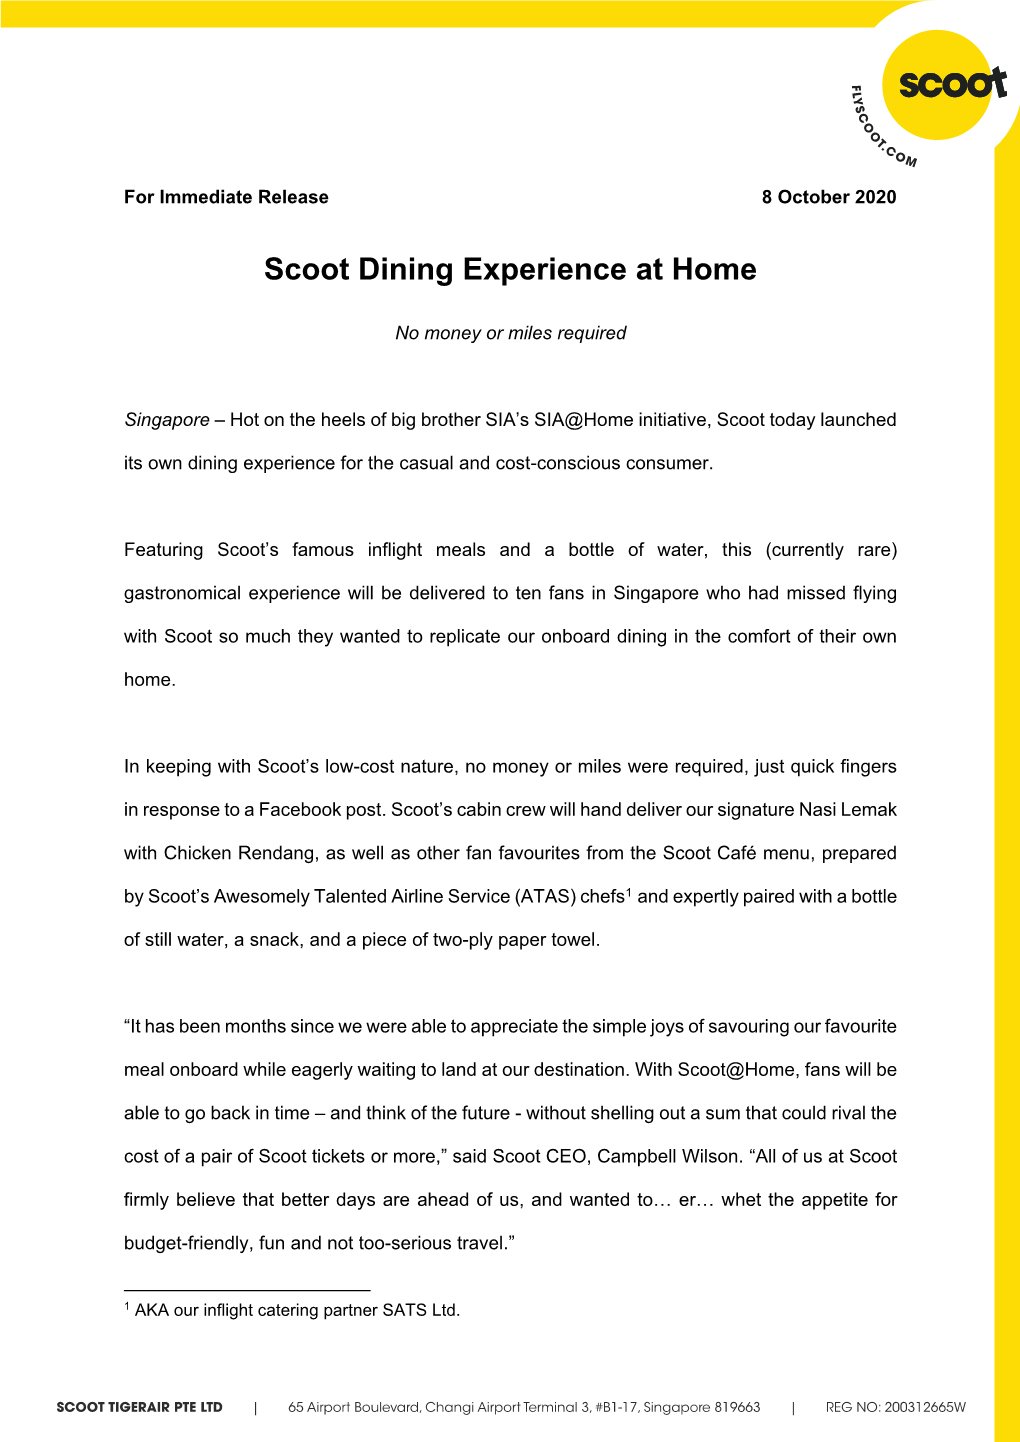 Scoot Dining Experience at Home